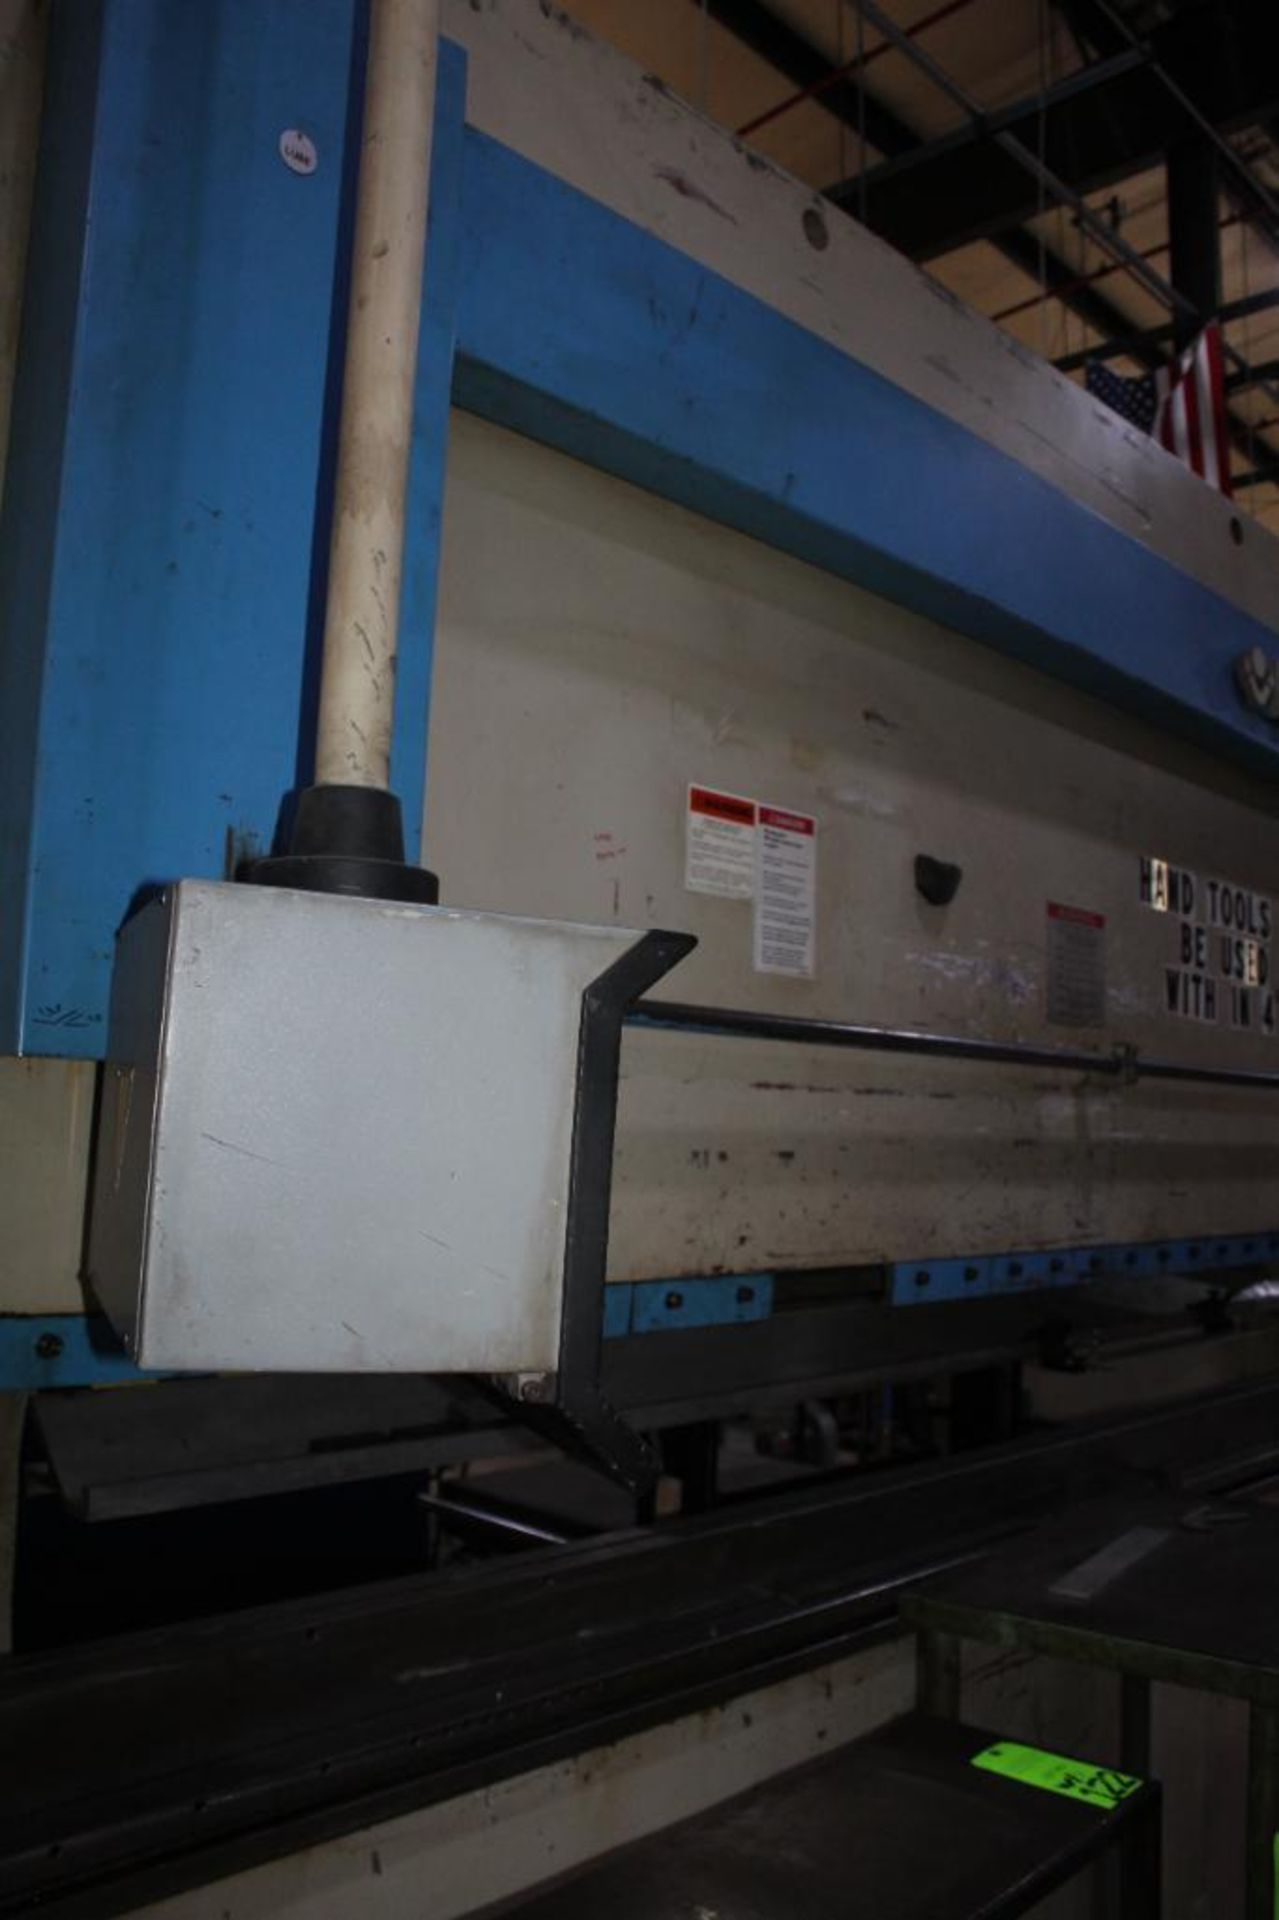 1995 LVD Hydraulic Press Brake Model 180JS13 Equipped With Hurco AutoBend 7 CNC Back Gage - Image 20 of 22